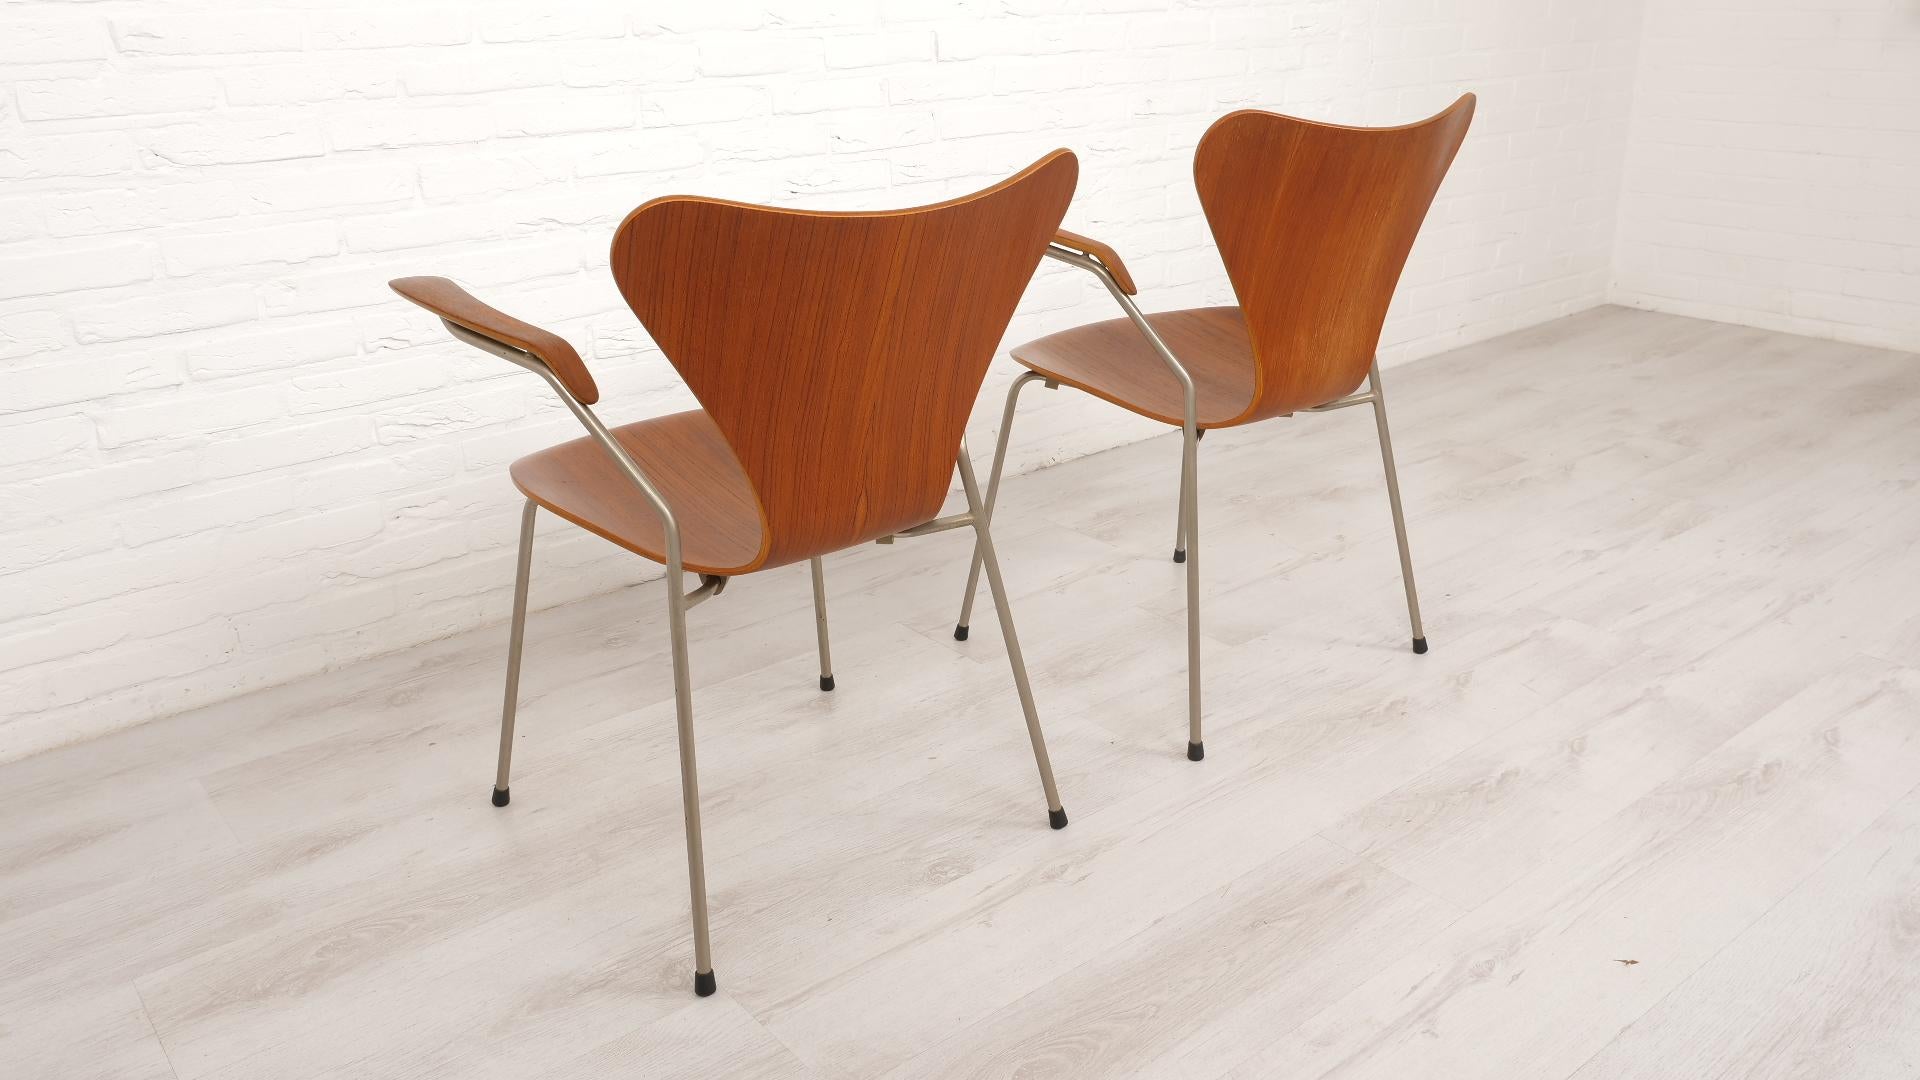 2 Vintage butterfly chairs with armrests by Arne Jacobsen model 3207 Teak 7